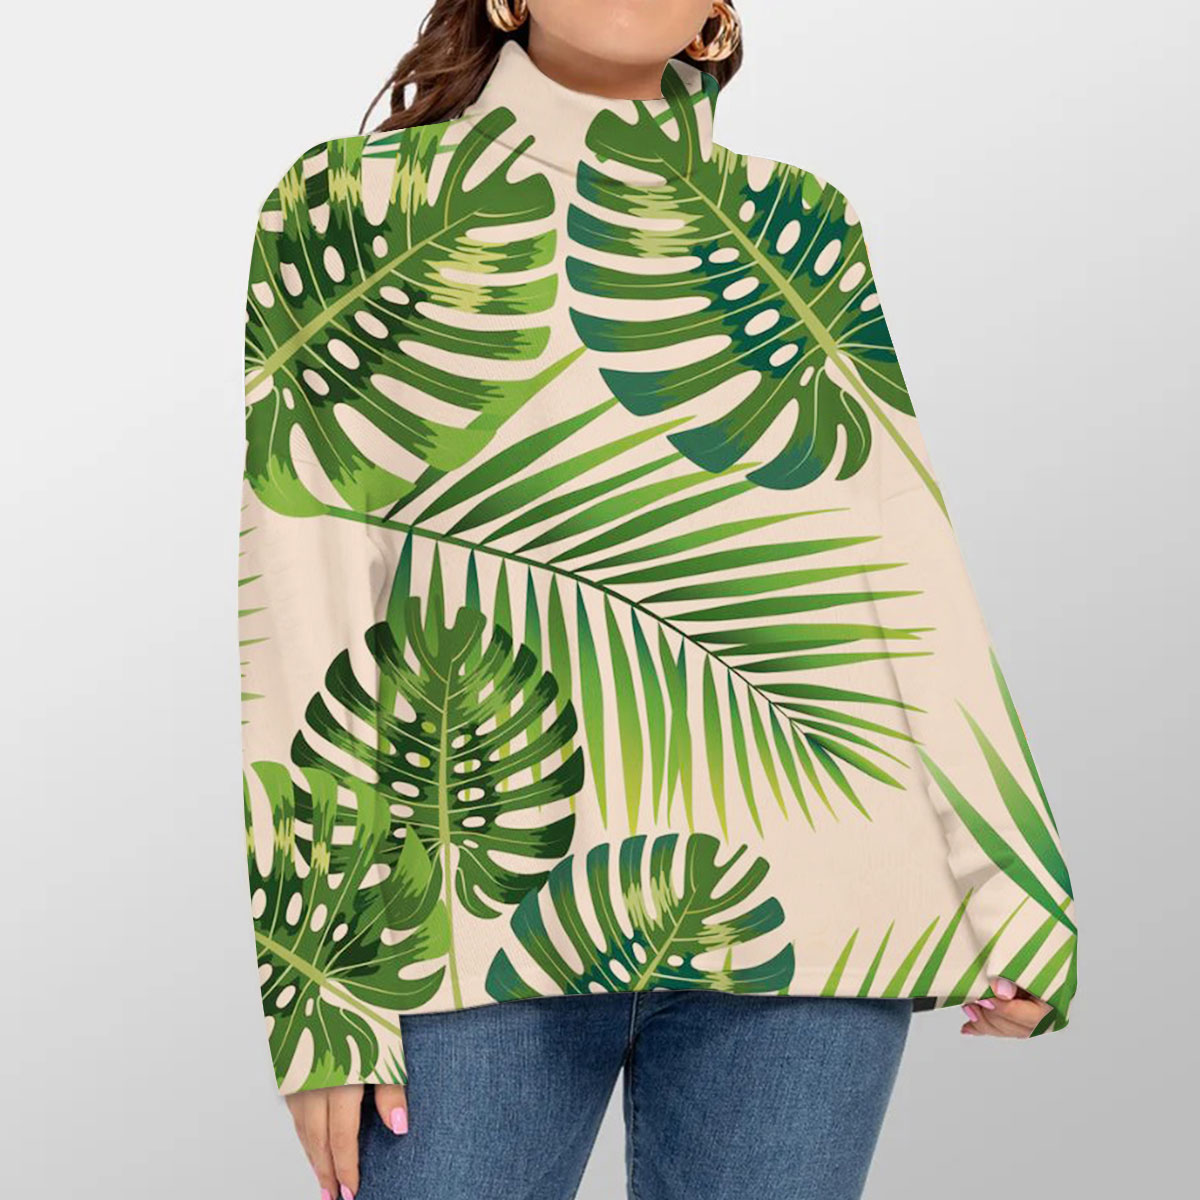 Pink Palm Leaves Turtleneck Sweater